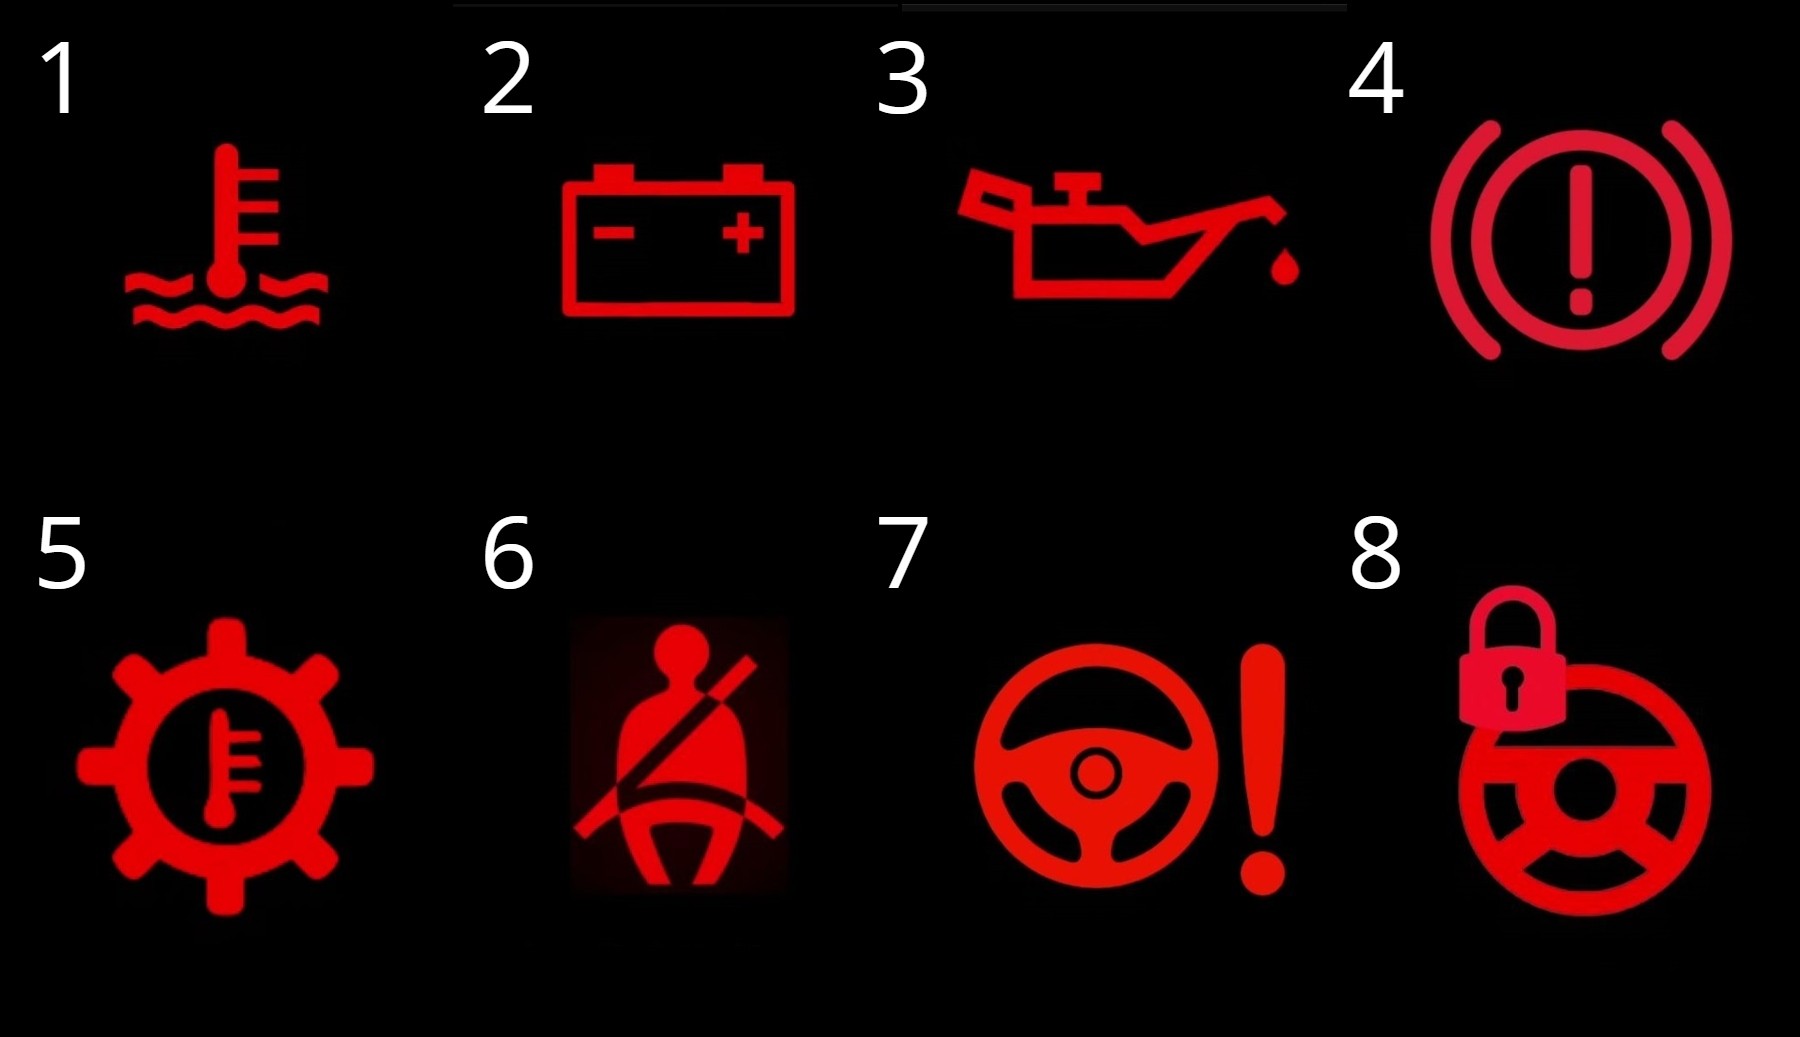 10 Warning lights - what is your van trying to tell you